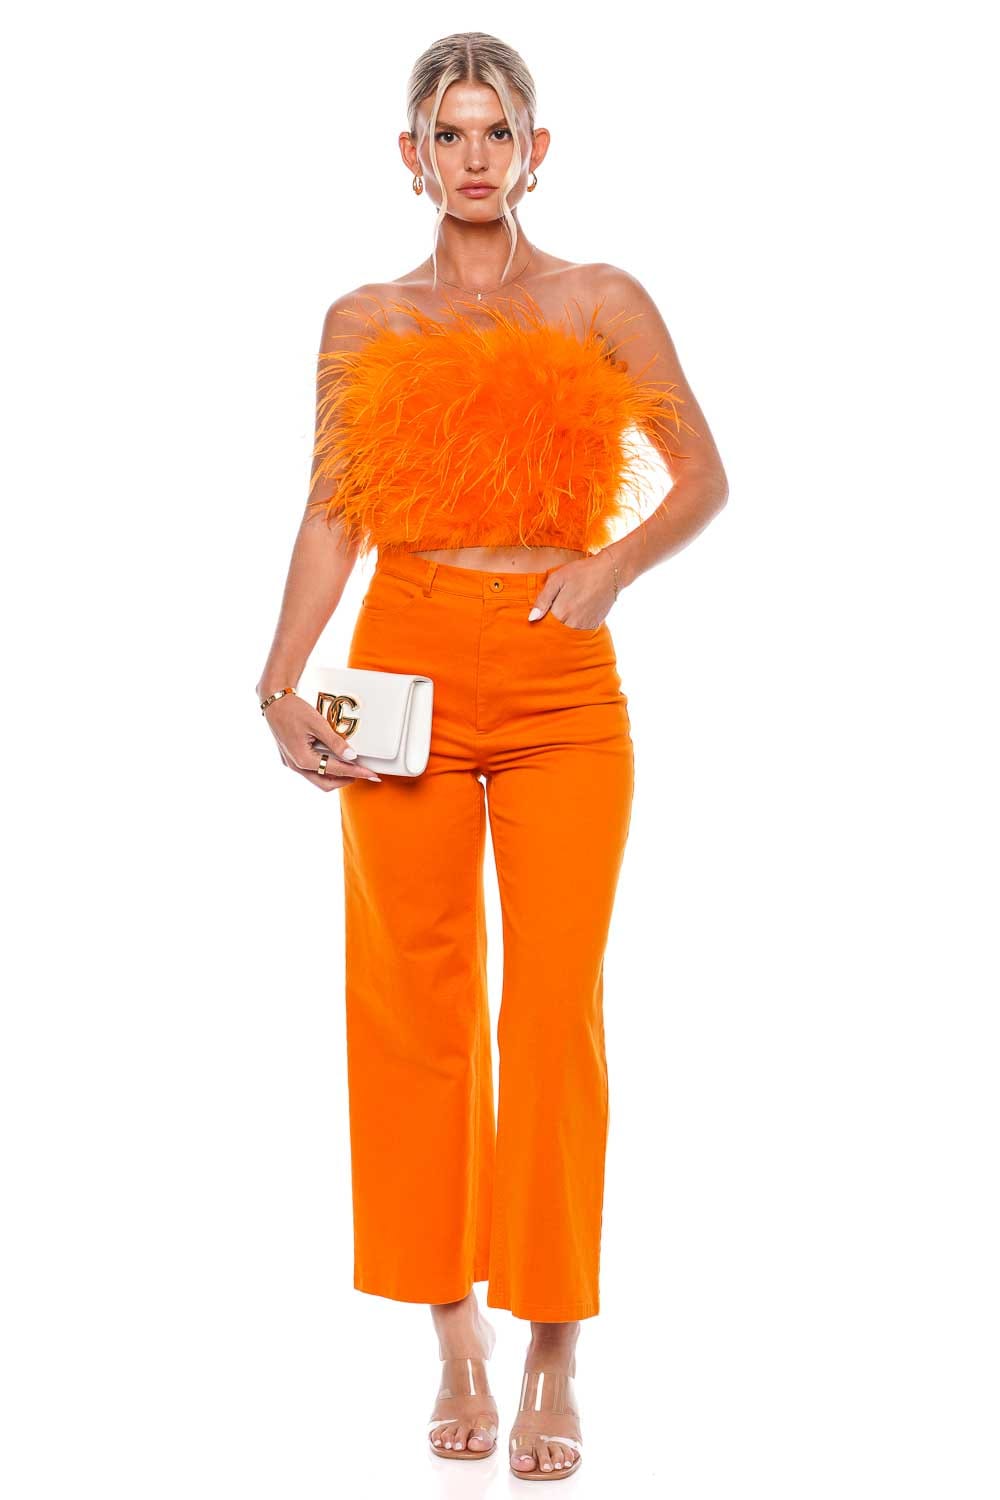 LAPOINTE Tangerine Feathered Strapless Crop Top